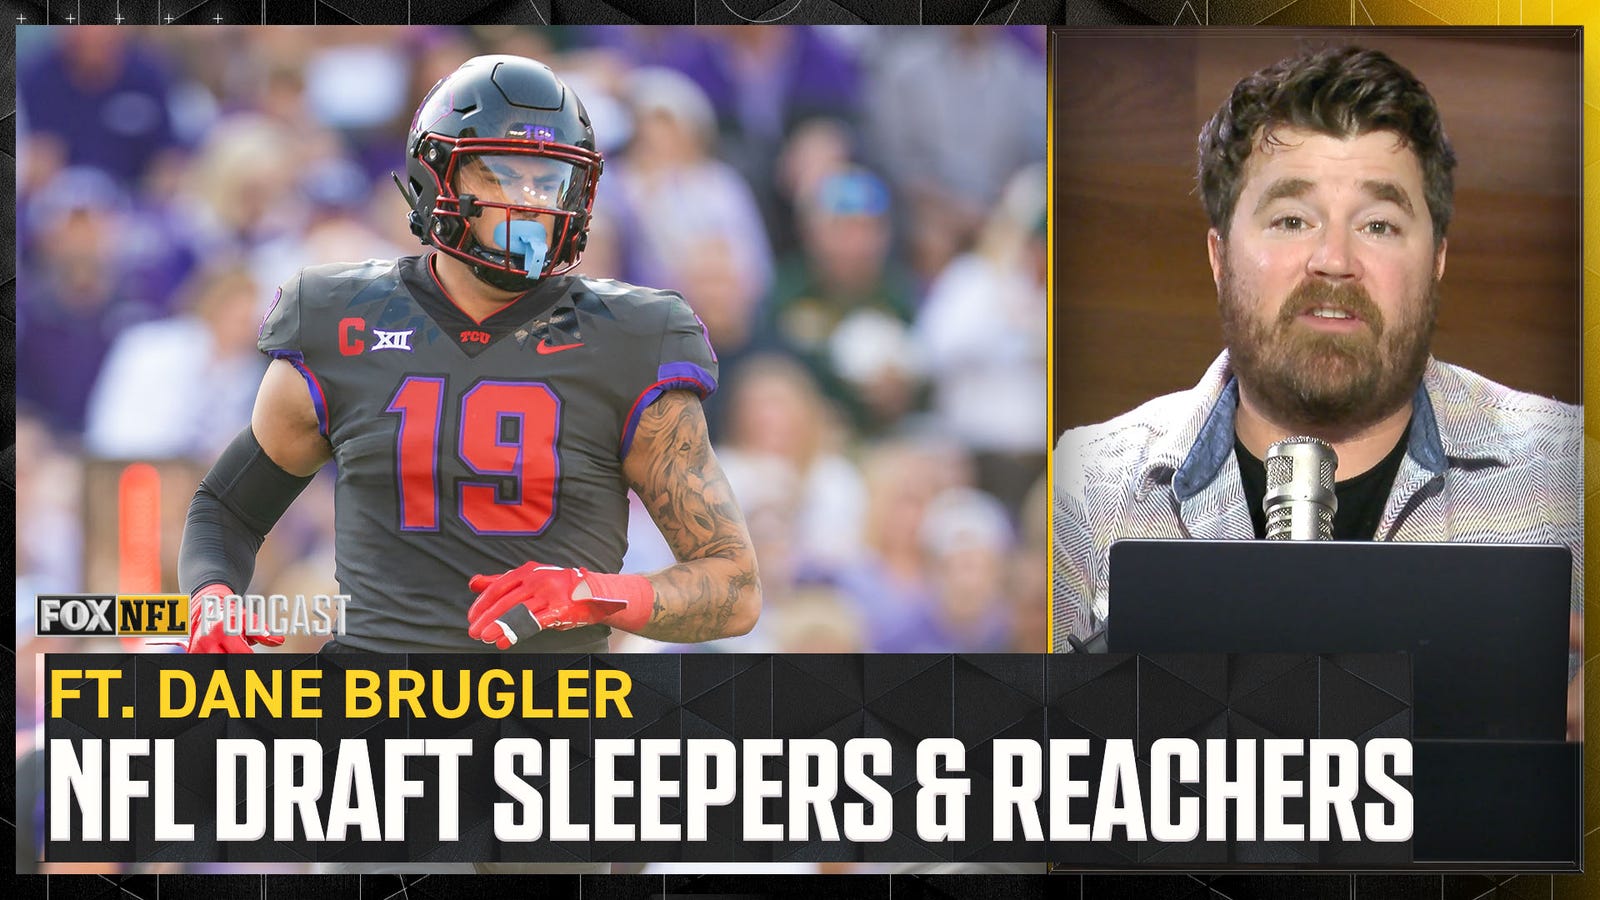 Biggest NFL Draft sleepers and reaches?